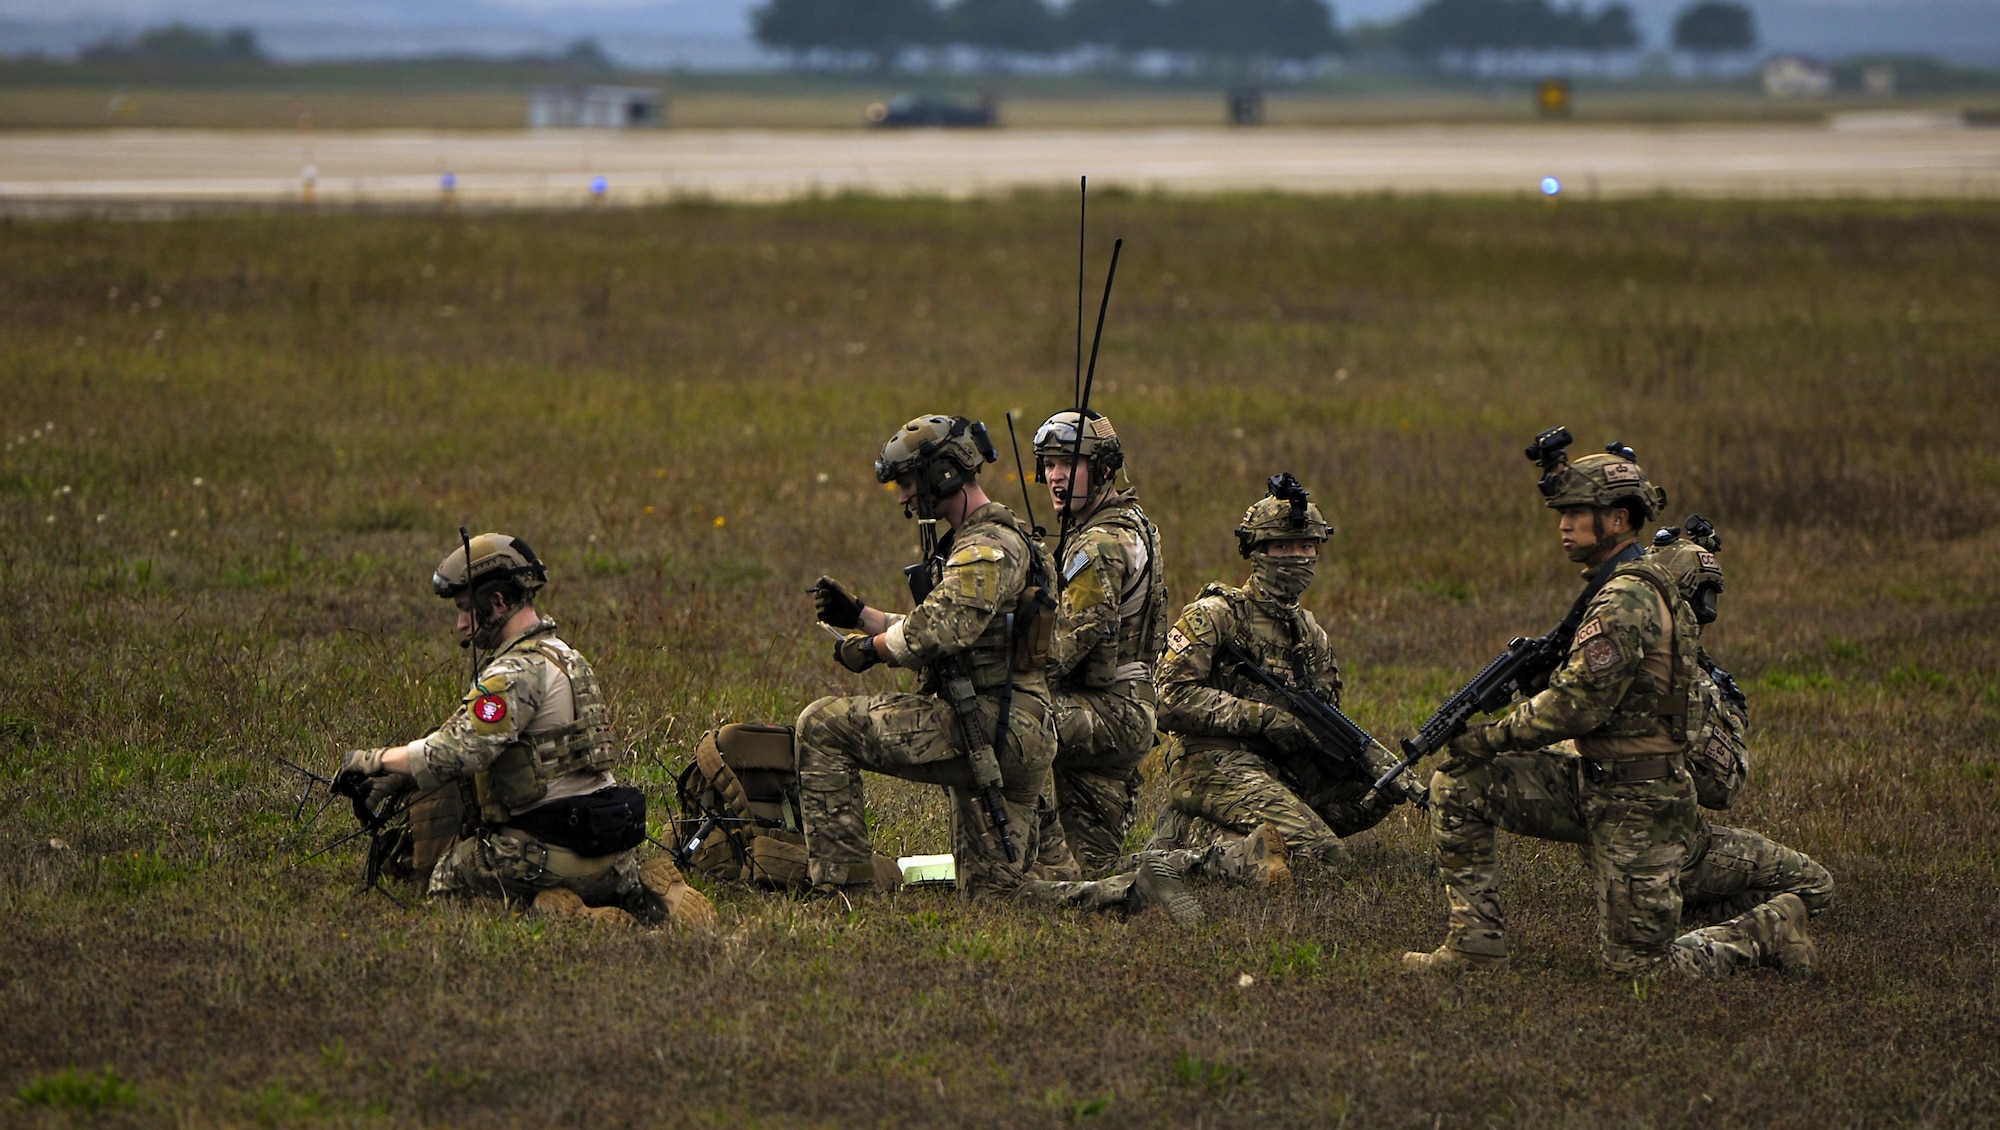 U.S. Air Force combat controllers assigned to the 1st Special Operations Squadron, 320th Special Tactics Squadron and Republic of Korea (ROK) 255th Special Operations Squadron, pull security and establish a line of communication at Kunsan Air Base, Republic of Korea, Oct. 22, 2016. Members from the 320th STS and 1st SOS worked with the ROK 255th SOS to enhance U.S. and ROK Air Force Special Operations Forces' capabilities. They conducted infiltration methods, jump clearing team operations, airfield establishment, aircraft control and close air support familiarization. (U.S. Air Force photo by Senior Airman Colville McFee/Released)